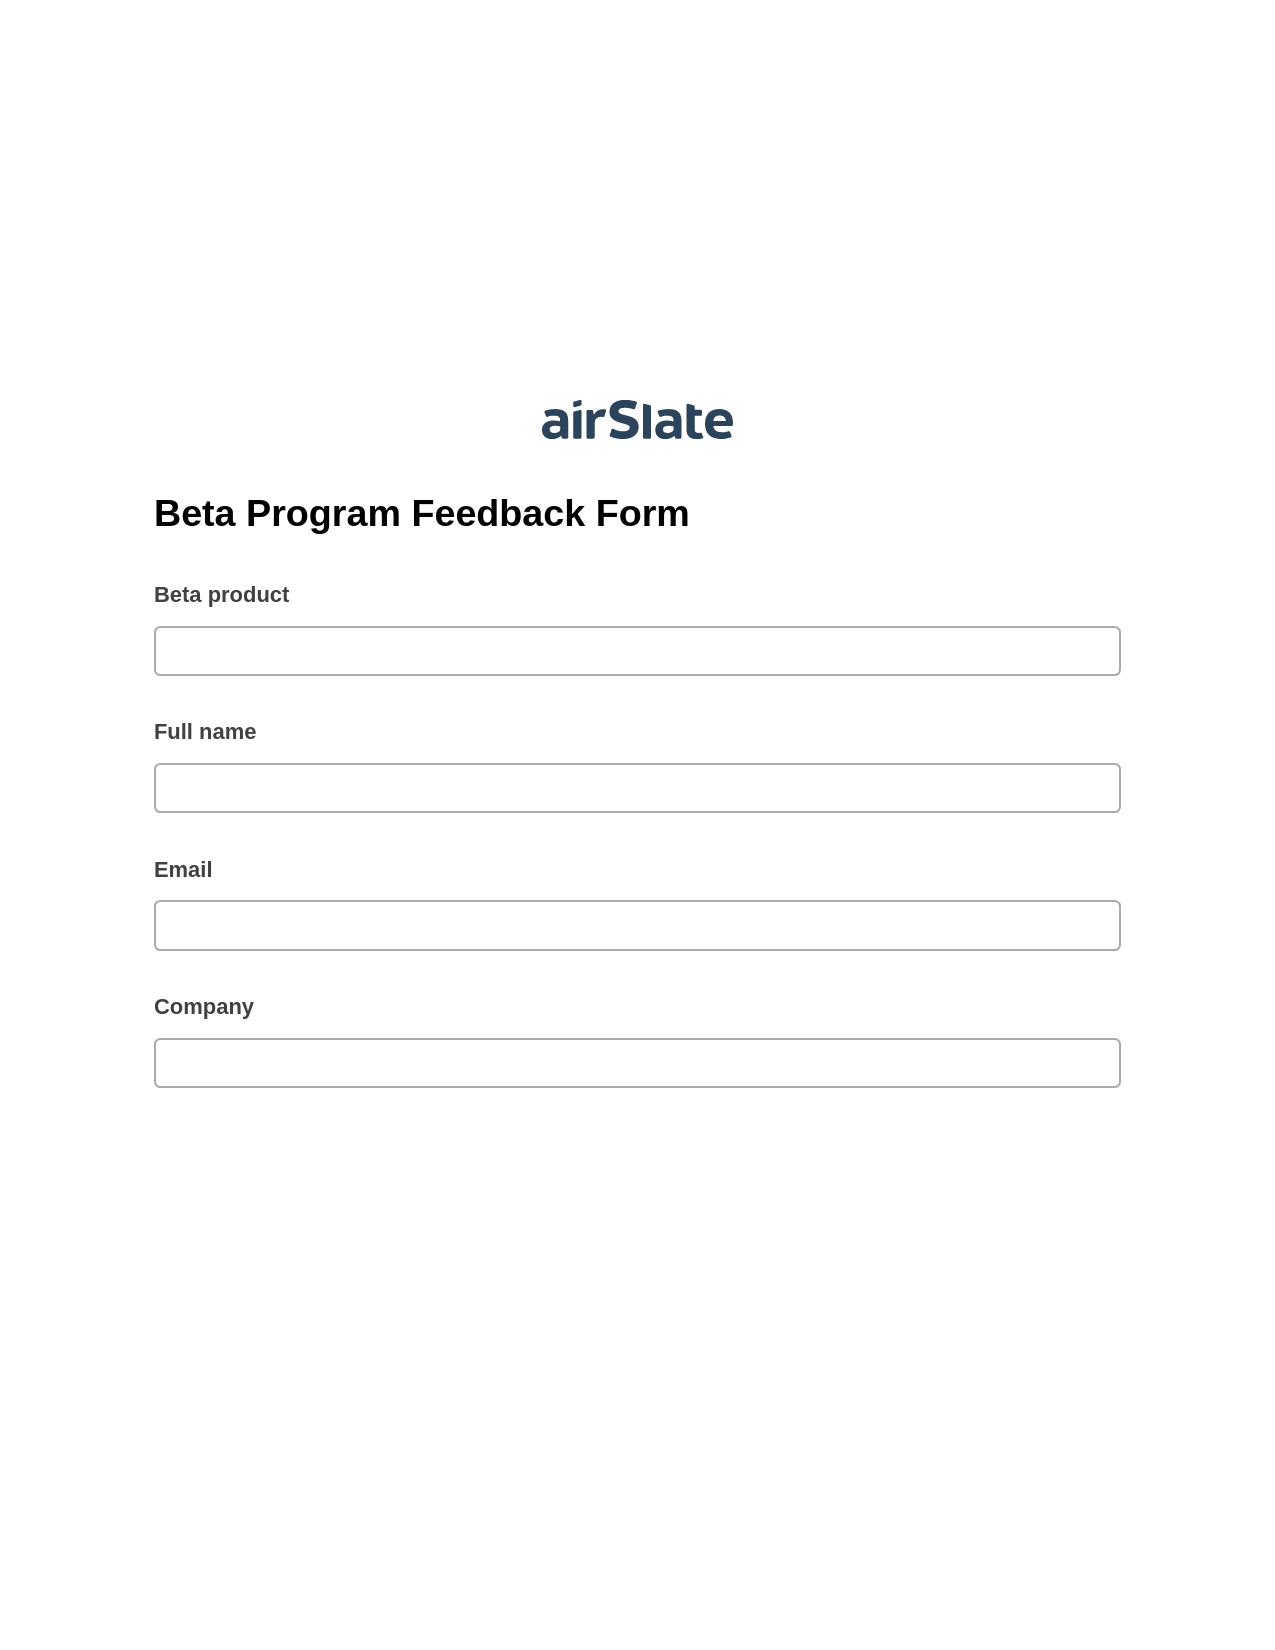 Beta Program Feedback Form Pre-fill from Salesforce Record Bot, SendGrid send Campaign bot, Export to Excel 365 Bot